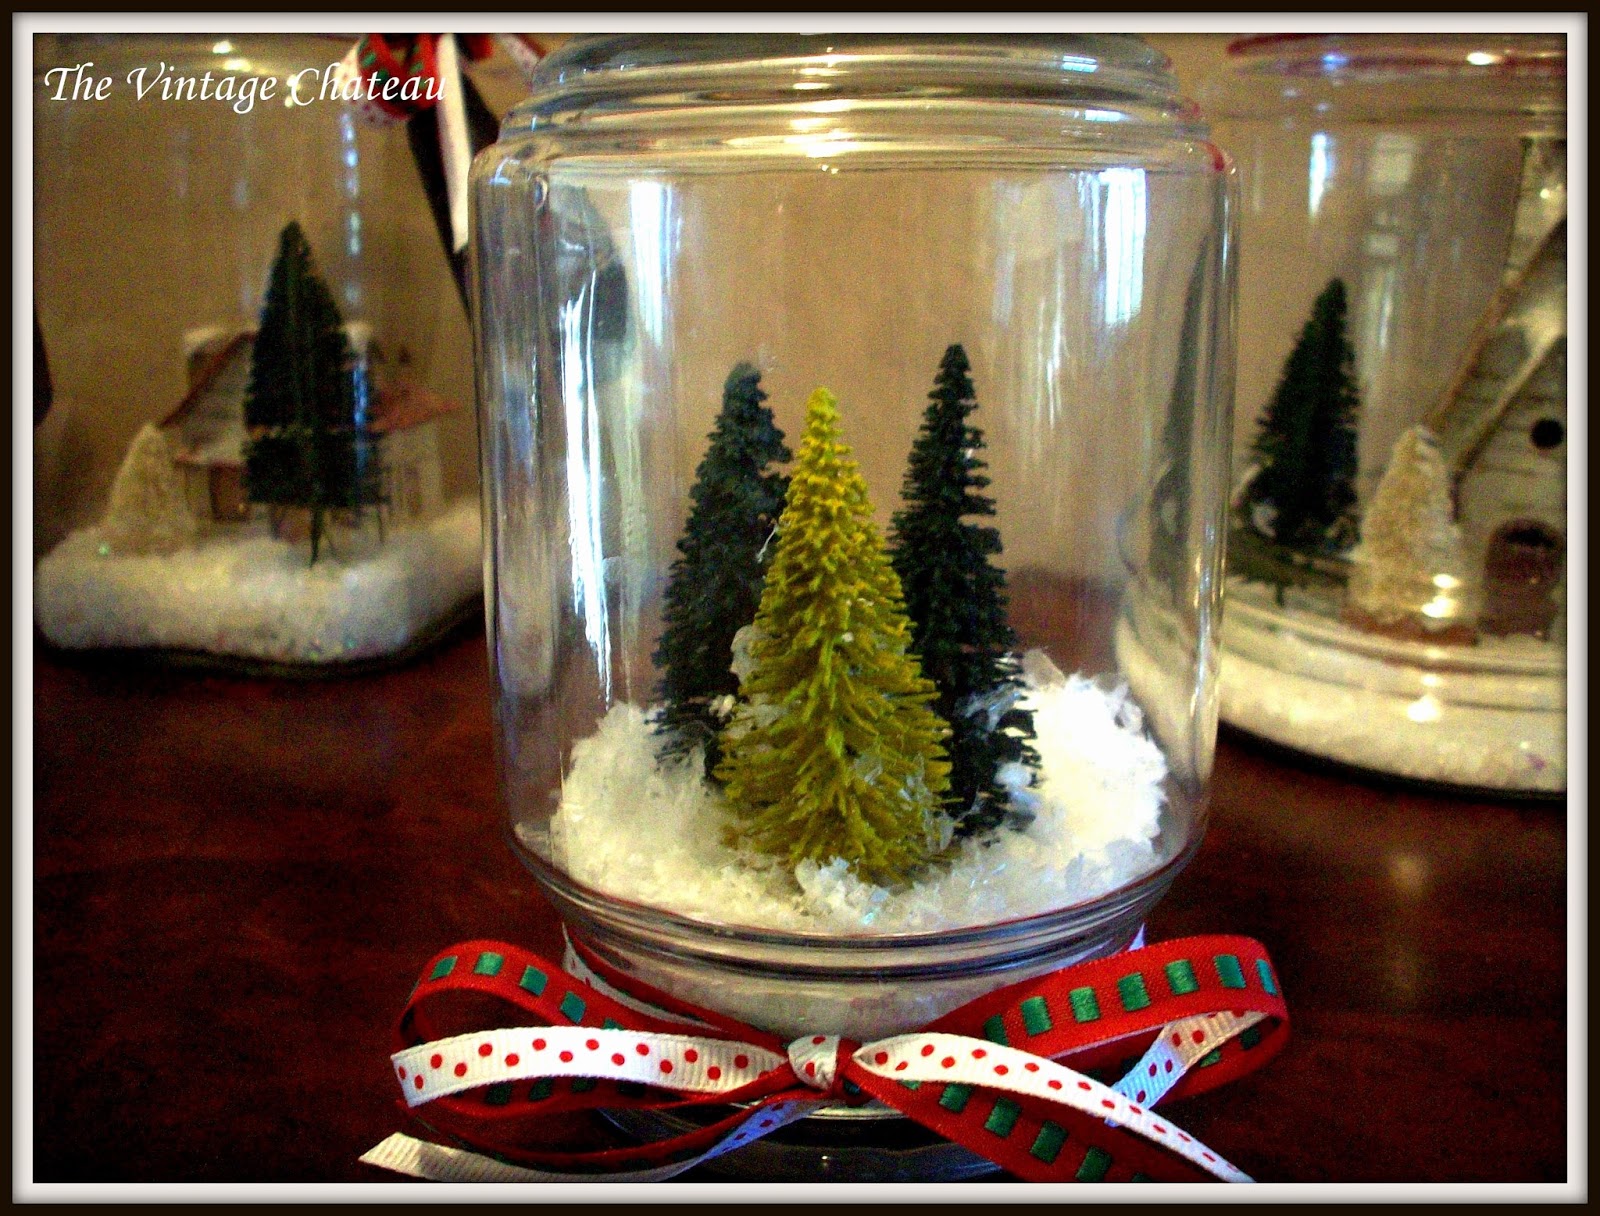 The Vintage Chateau: Snow Globes